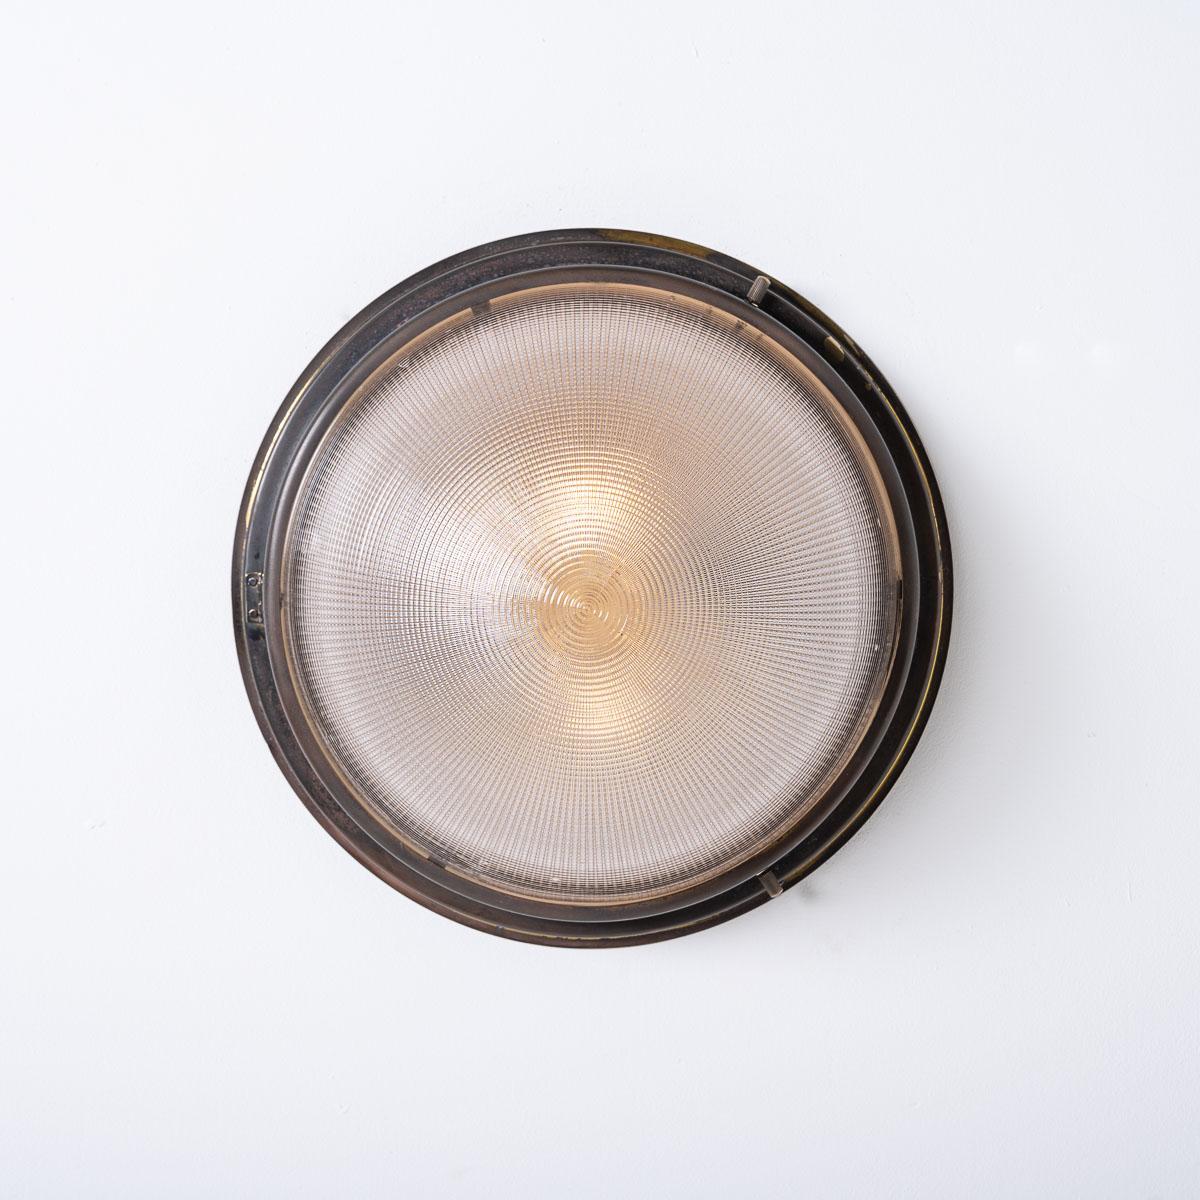 Vintage Holophane Blondel Bowl Flush Ceiling Fitting

Stunning circular flush ceiling / wall light by Holophane, Made in England circa 1930.

Beautiful aged copper fitting with wonderful patina hold a rare Holophane 12